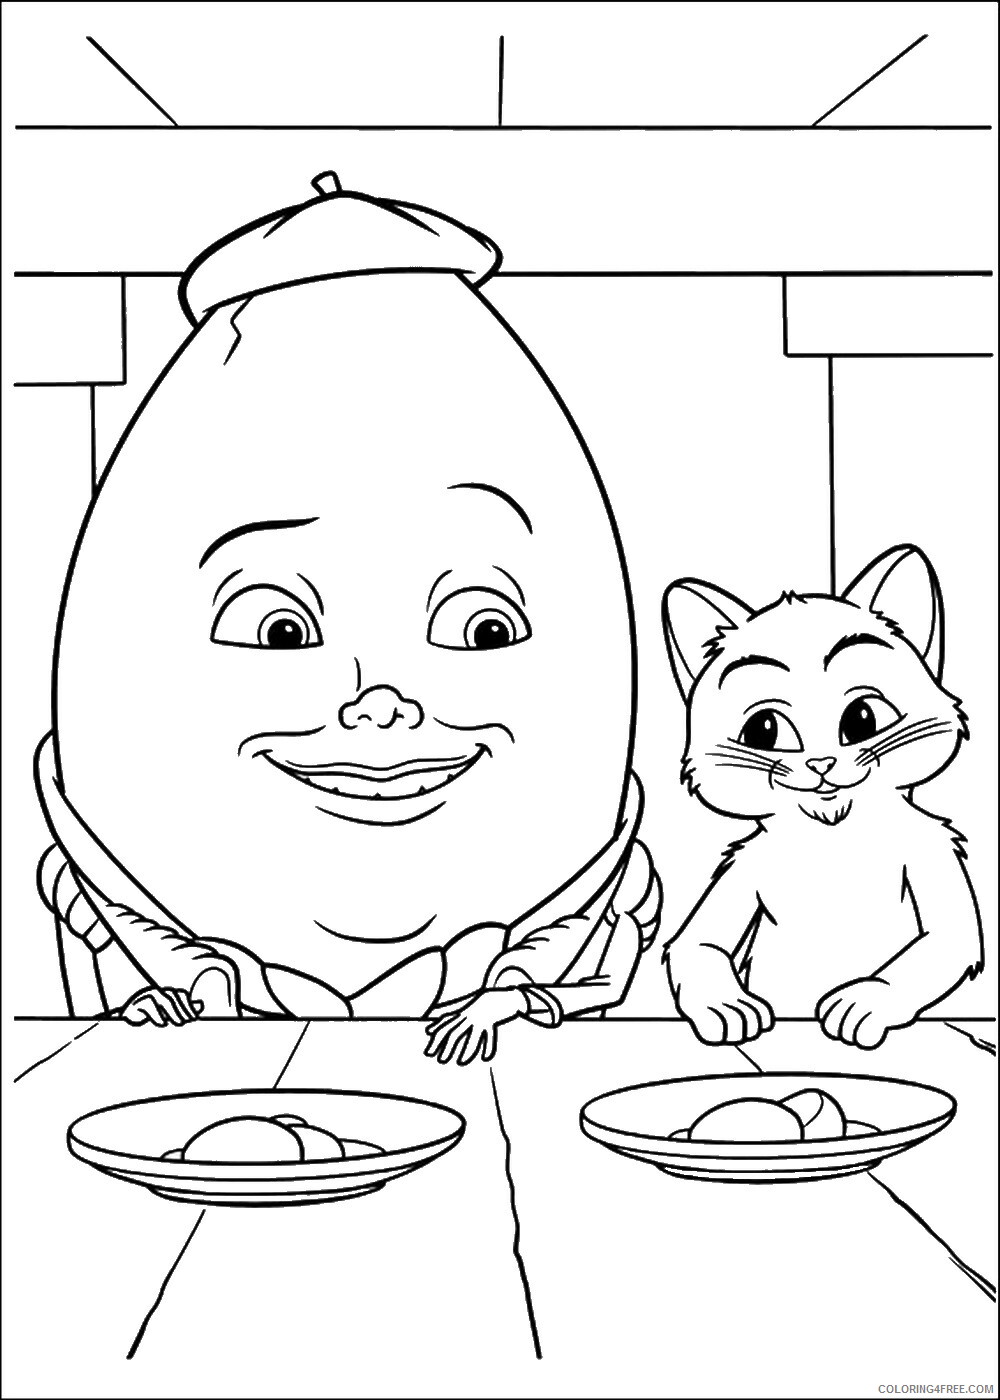 Puss in Boots Coloring Pages TV Film puss_boots_cl_16 Printable 2020 06925 Coloring4free